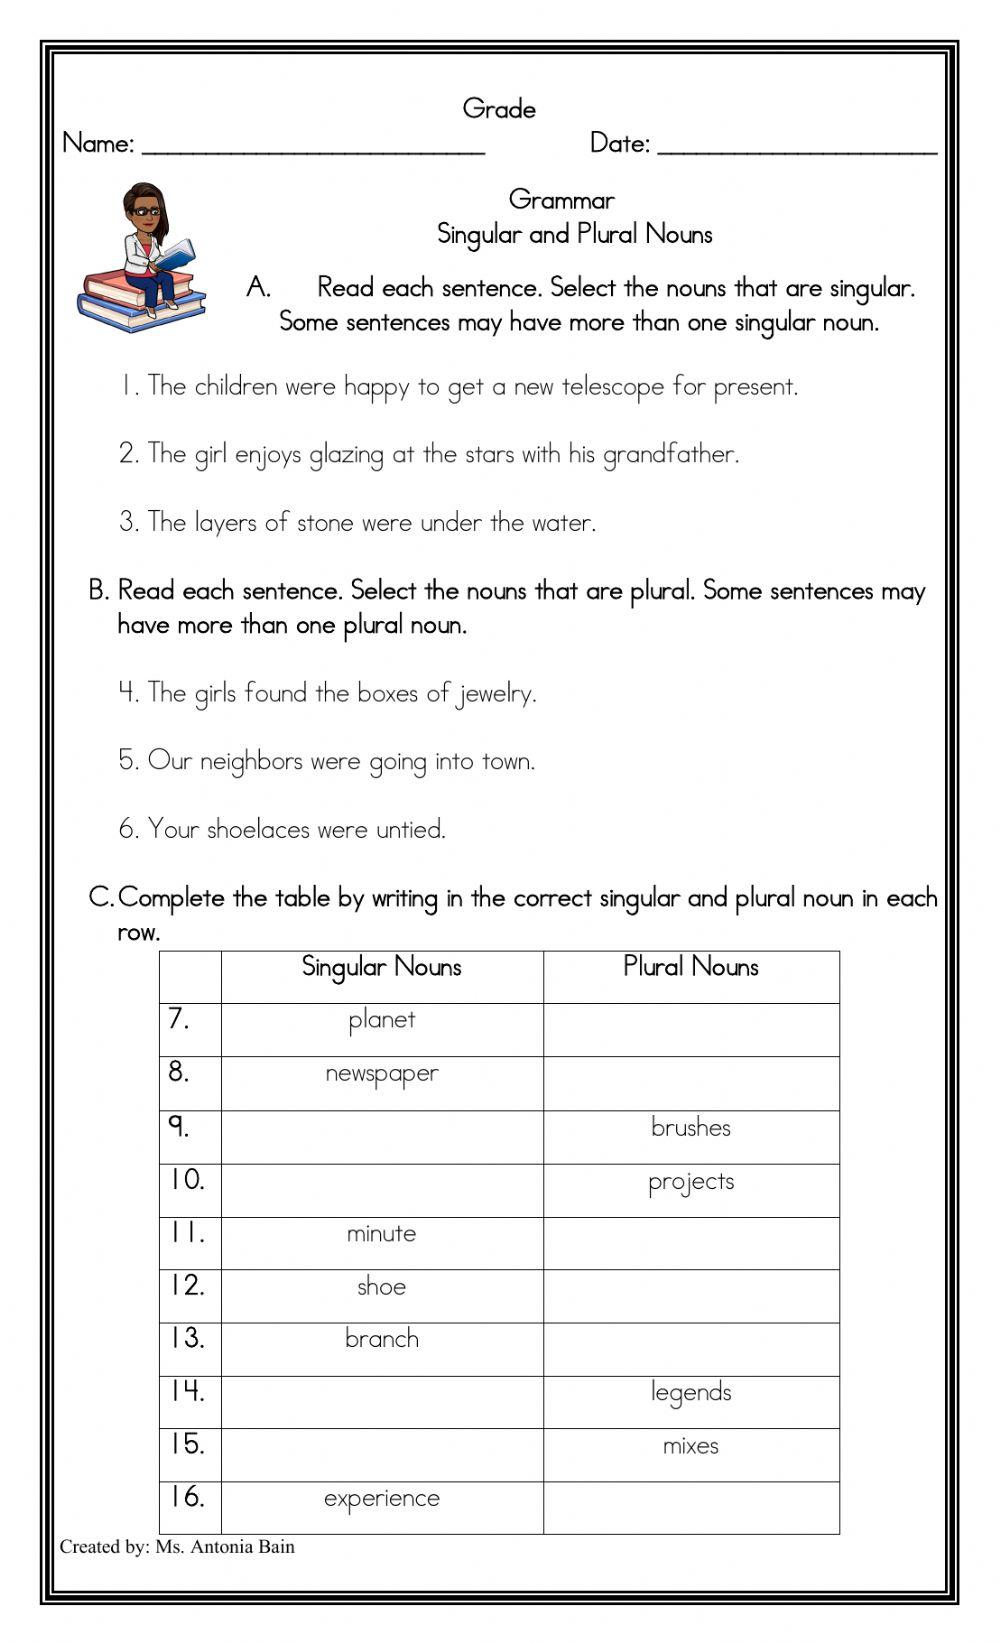 Singular and Plural Nouns s and es